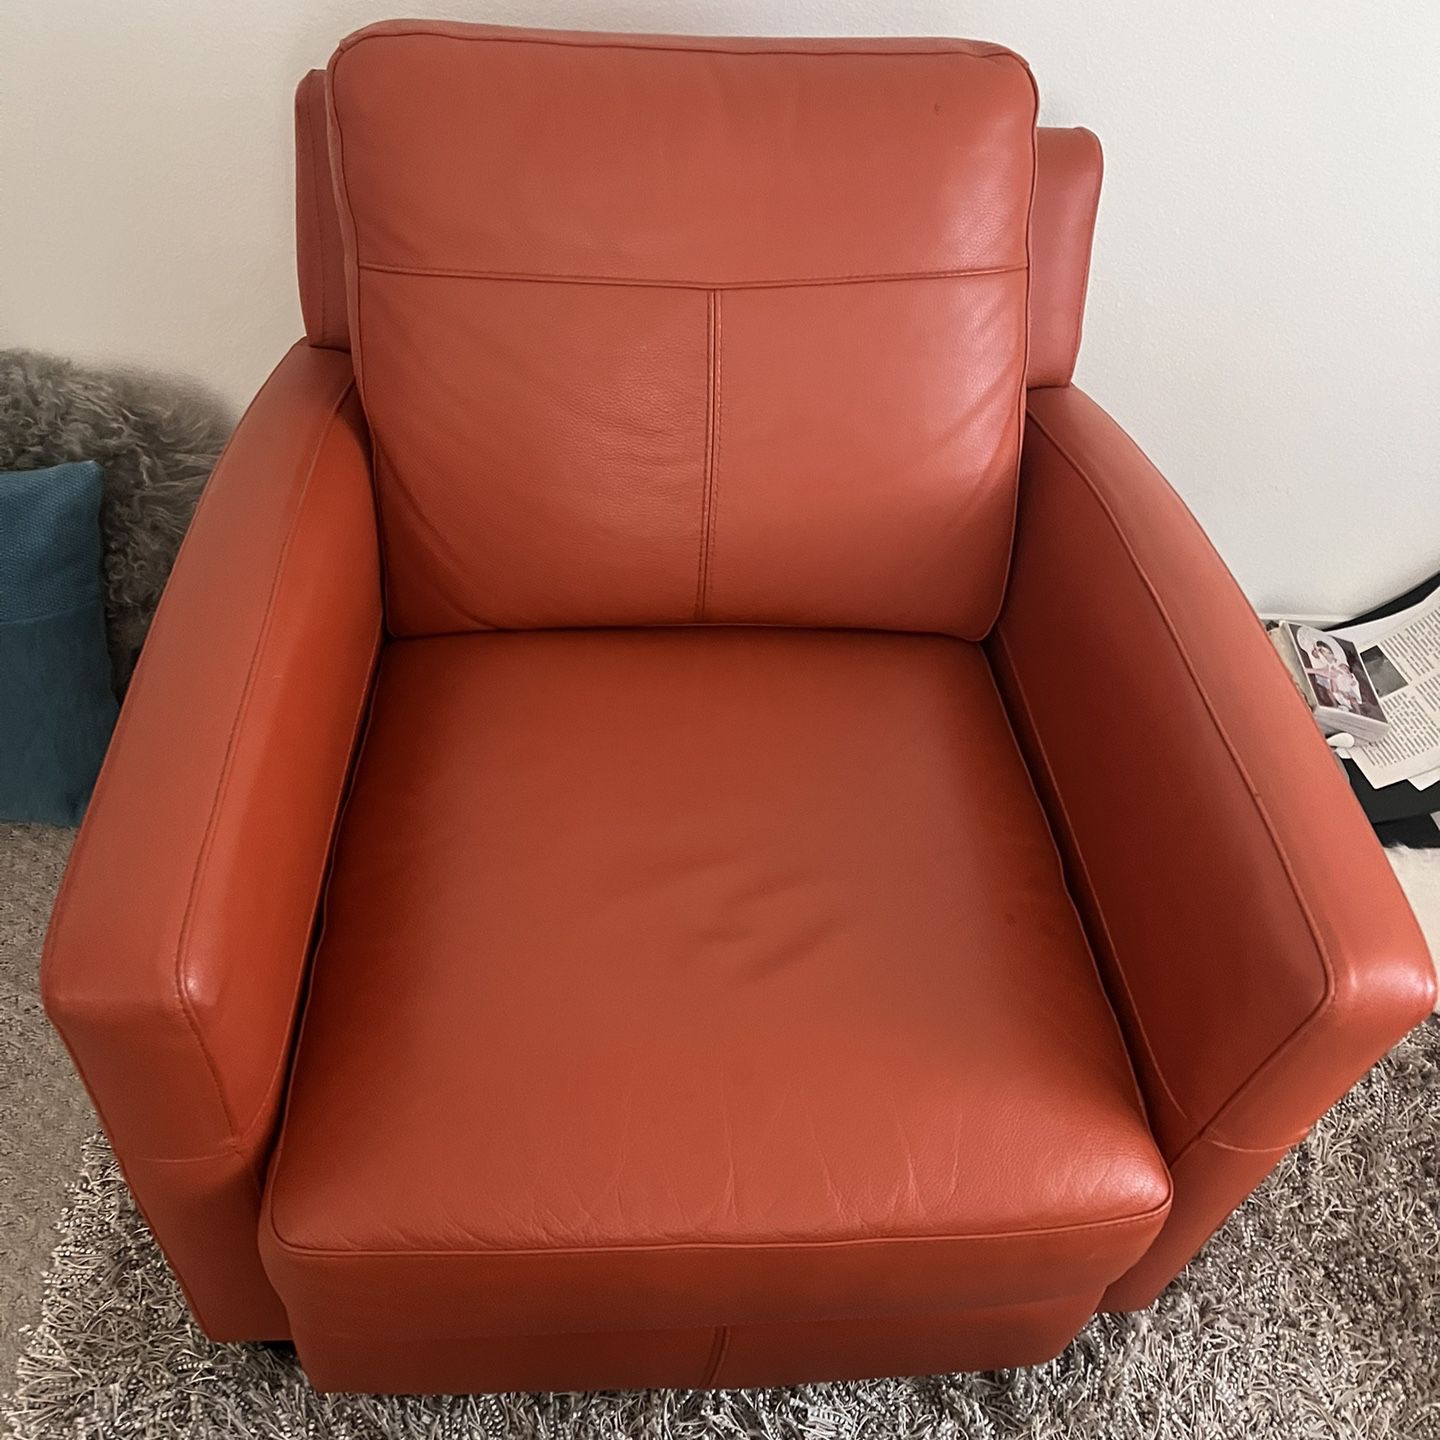 Small Italian Leather Sofa with Option to Purchase Larger Size